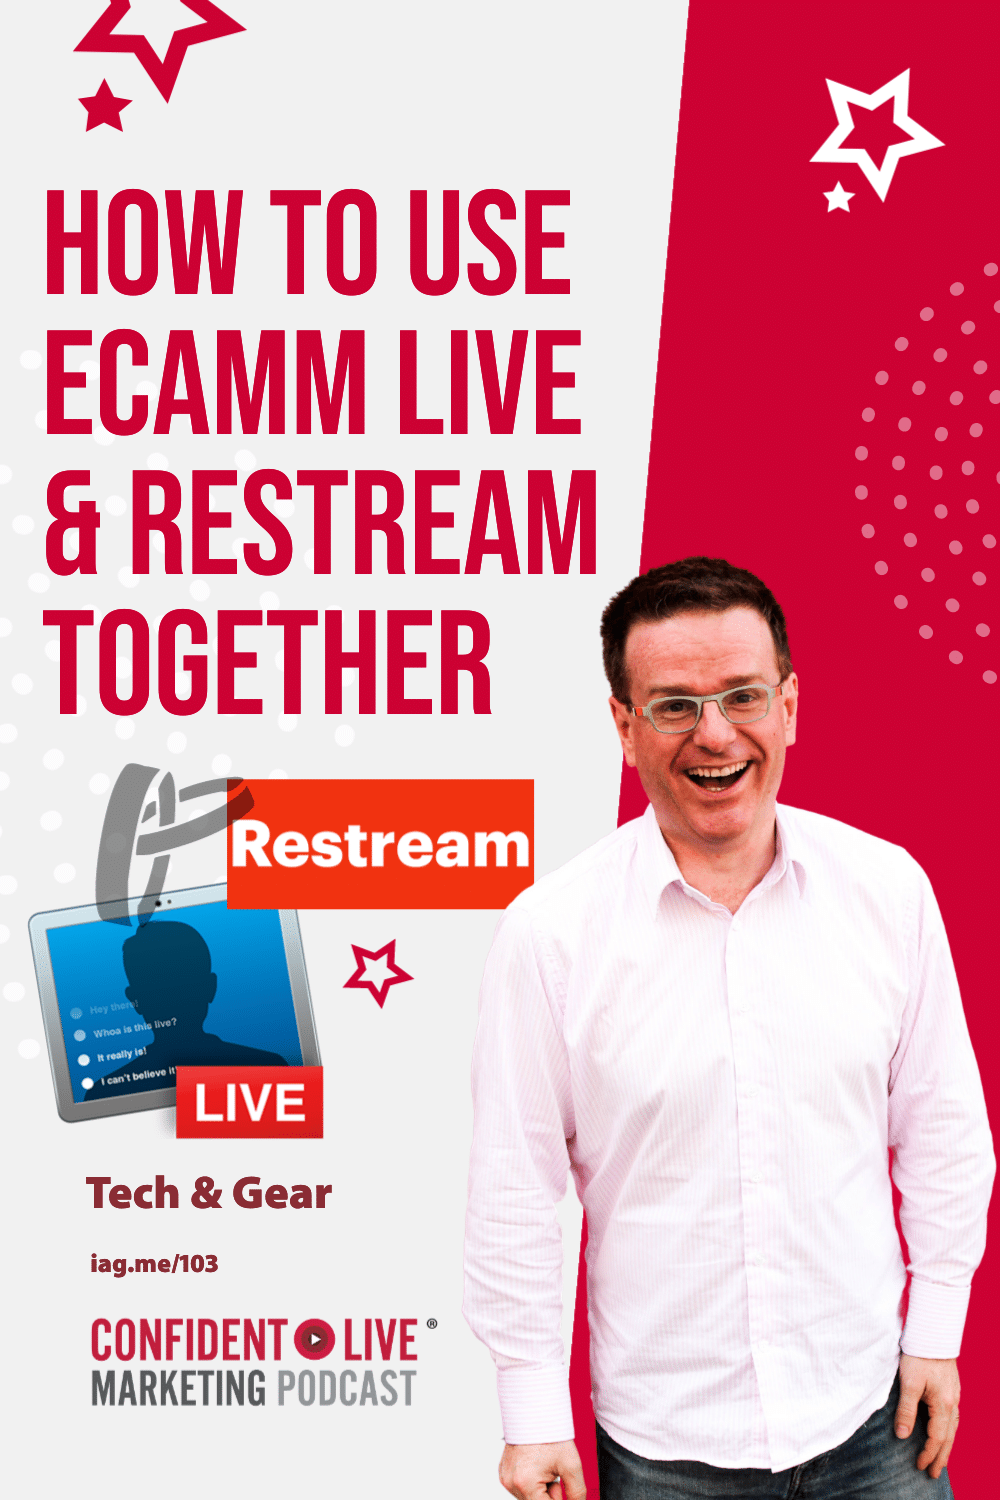 How to Use Ecamm Live and Restream Together